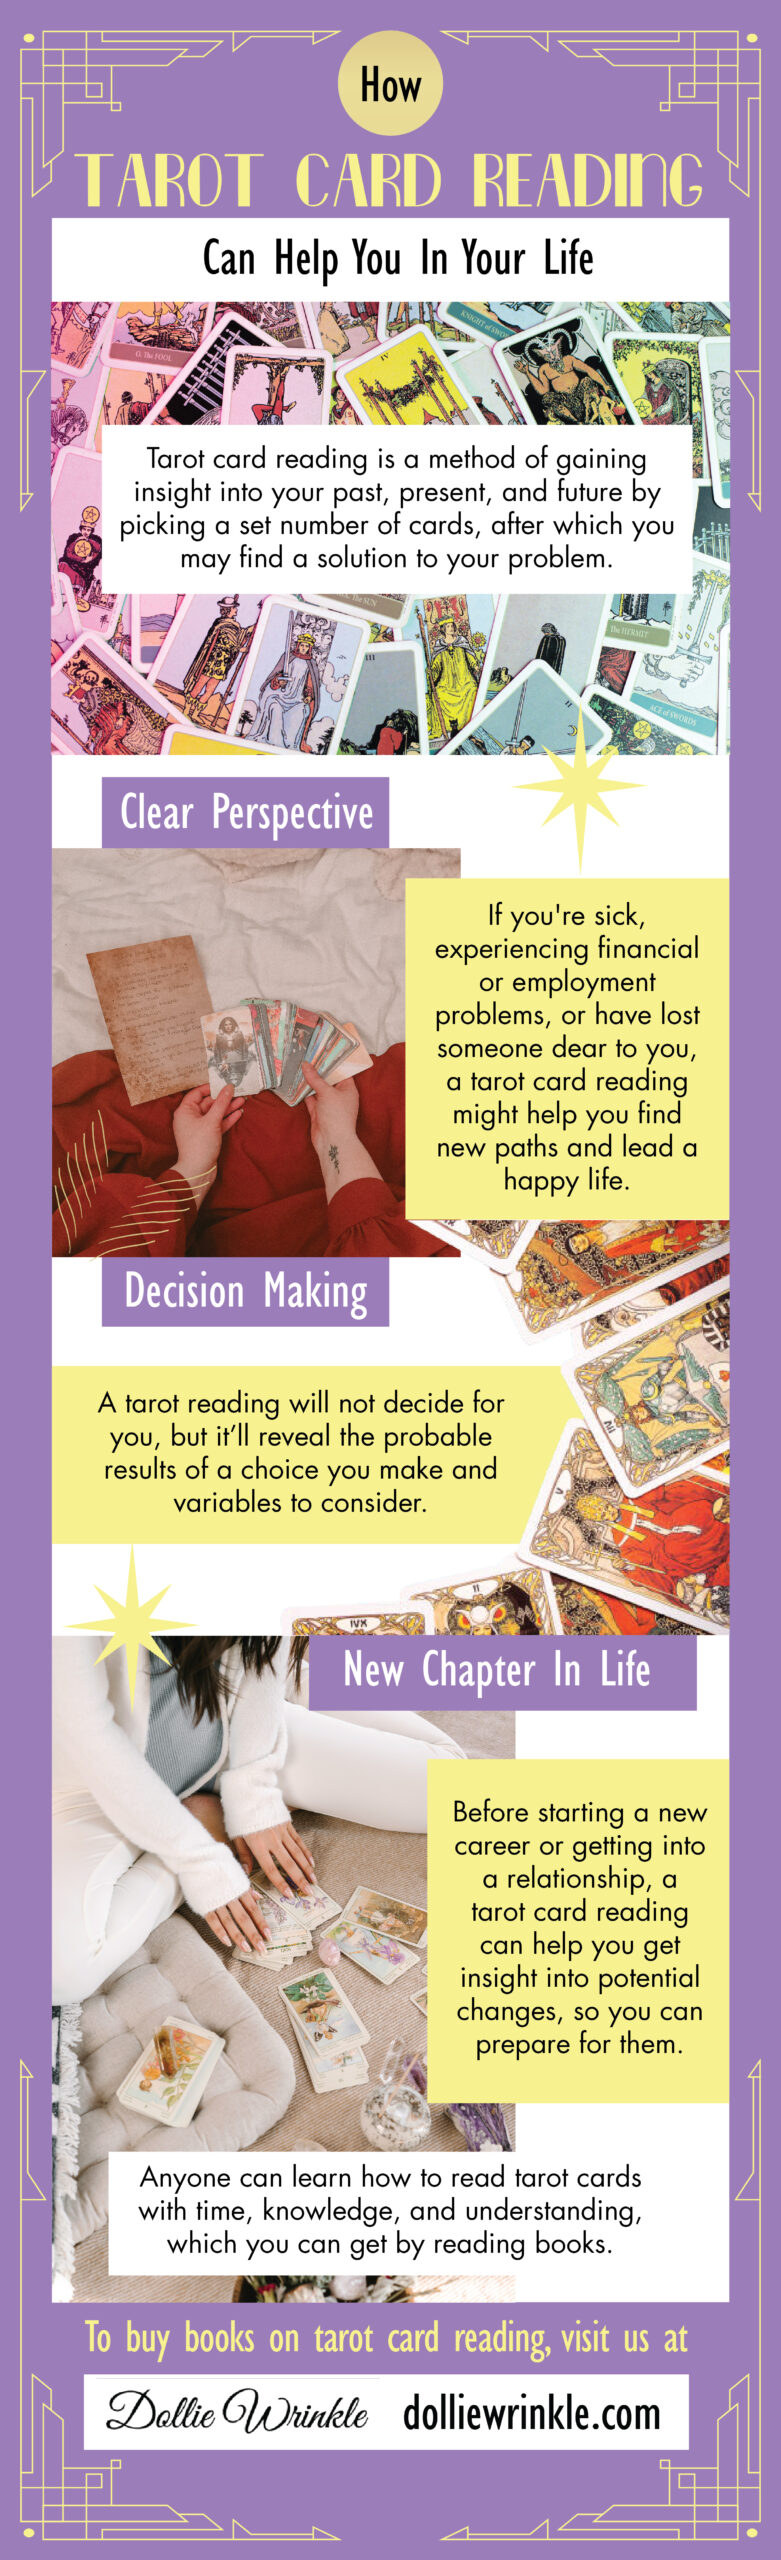 How Tarot Card Reading can Help You in Your Life